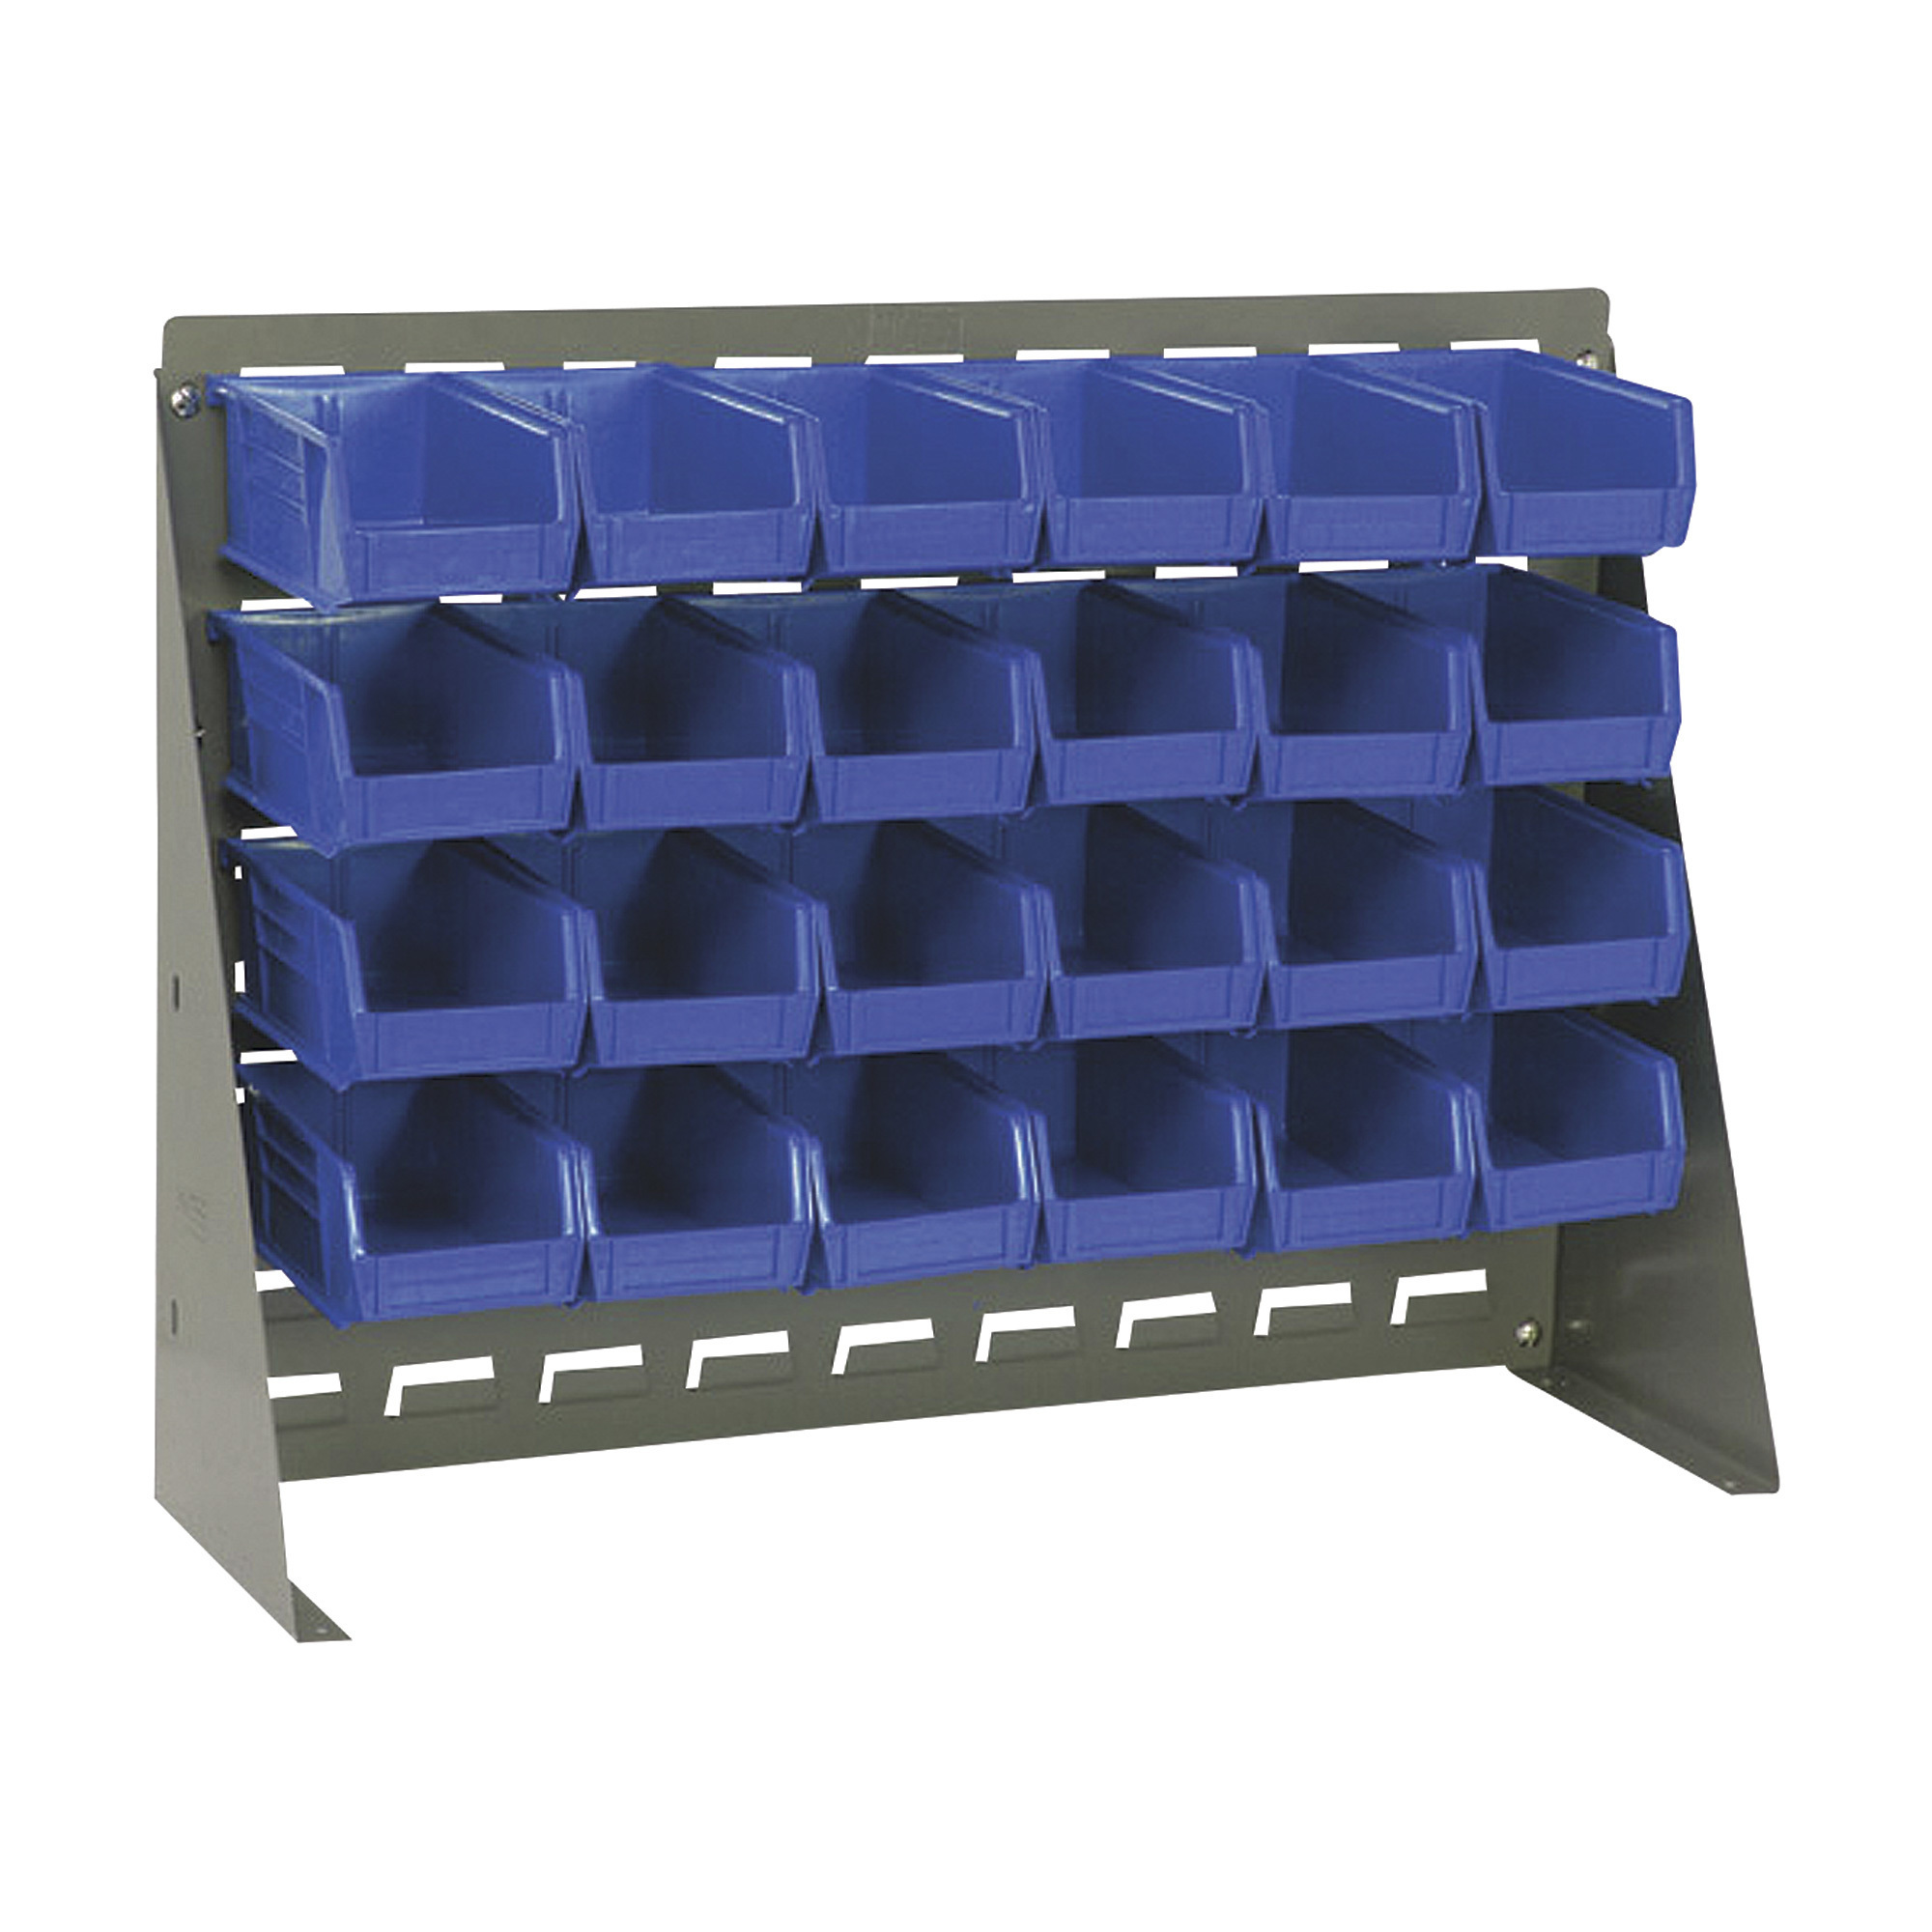 Quantum Storage Louvered Panel Bench Rack with 24 Bins, 27Inch L x 8Inch W x 21Inch H, Blue, Model QBR-2721-220-24BL